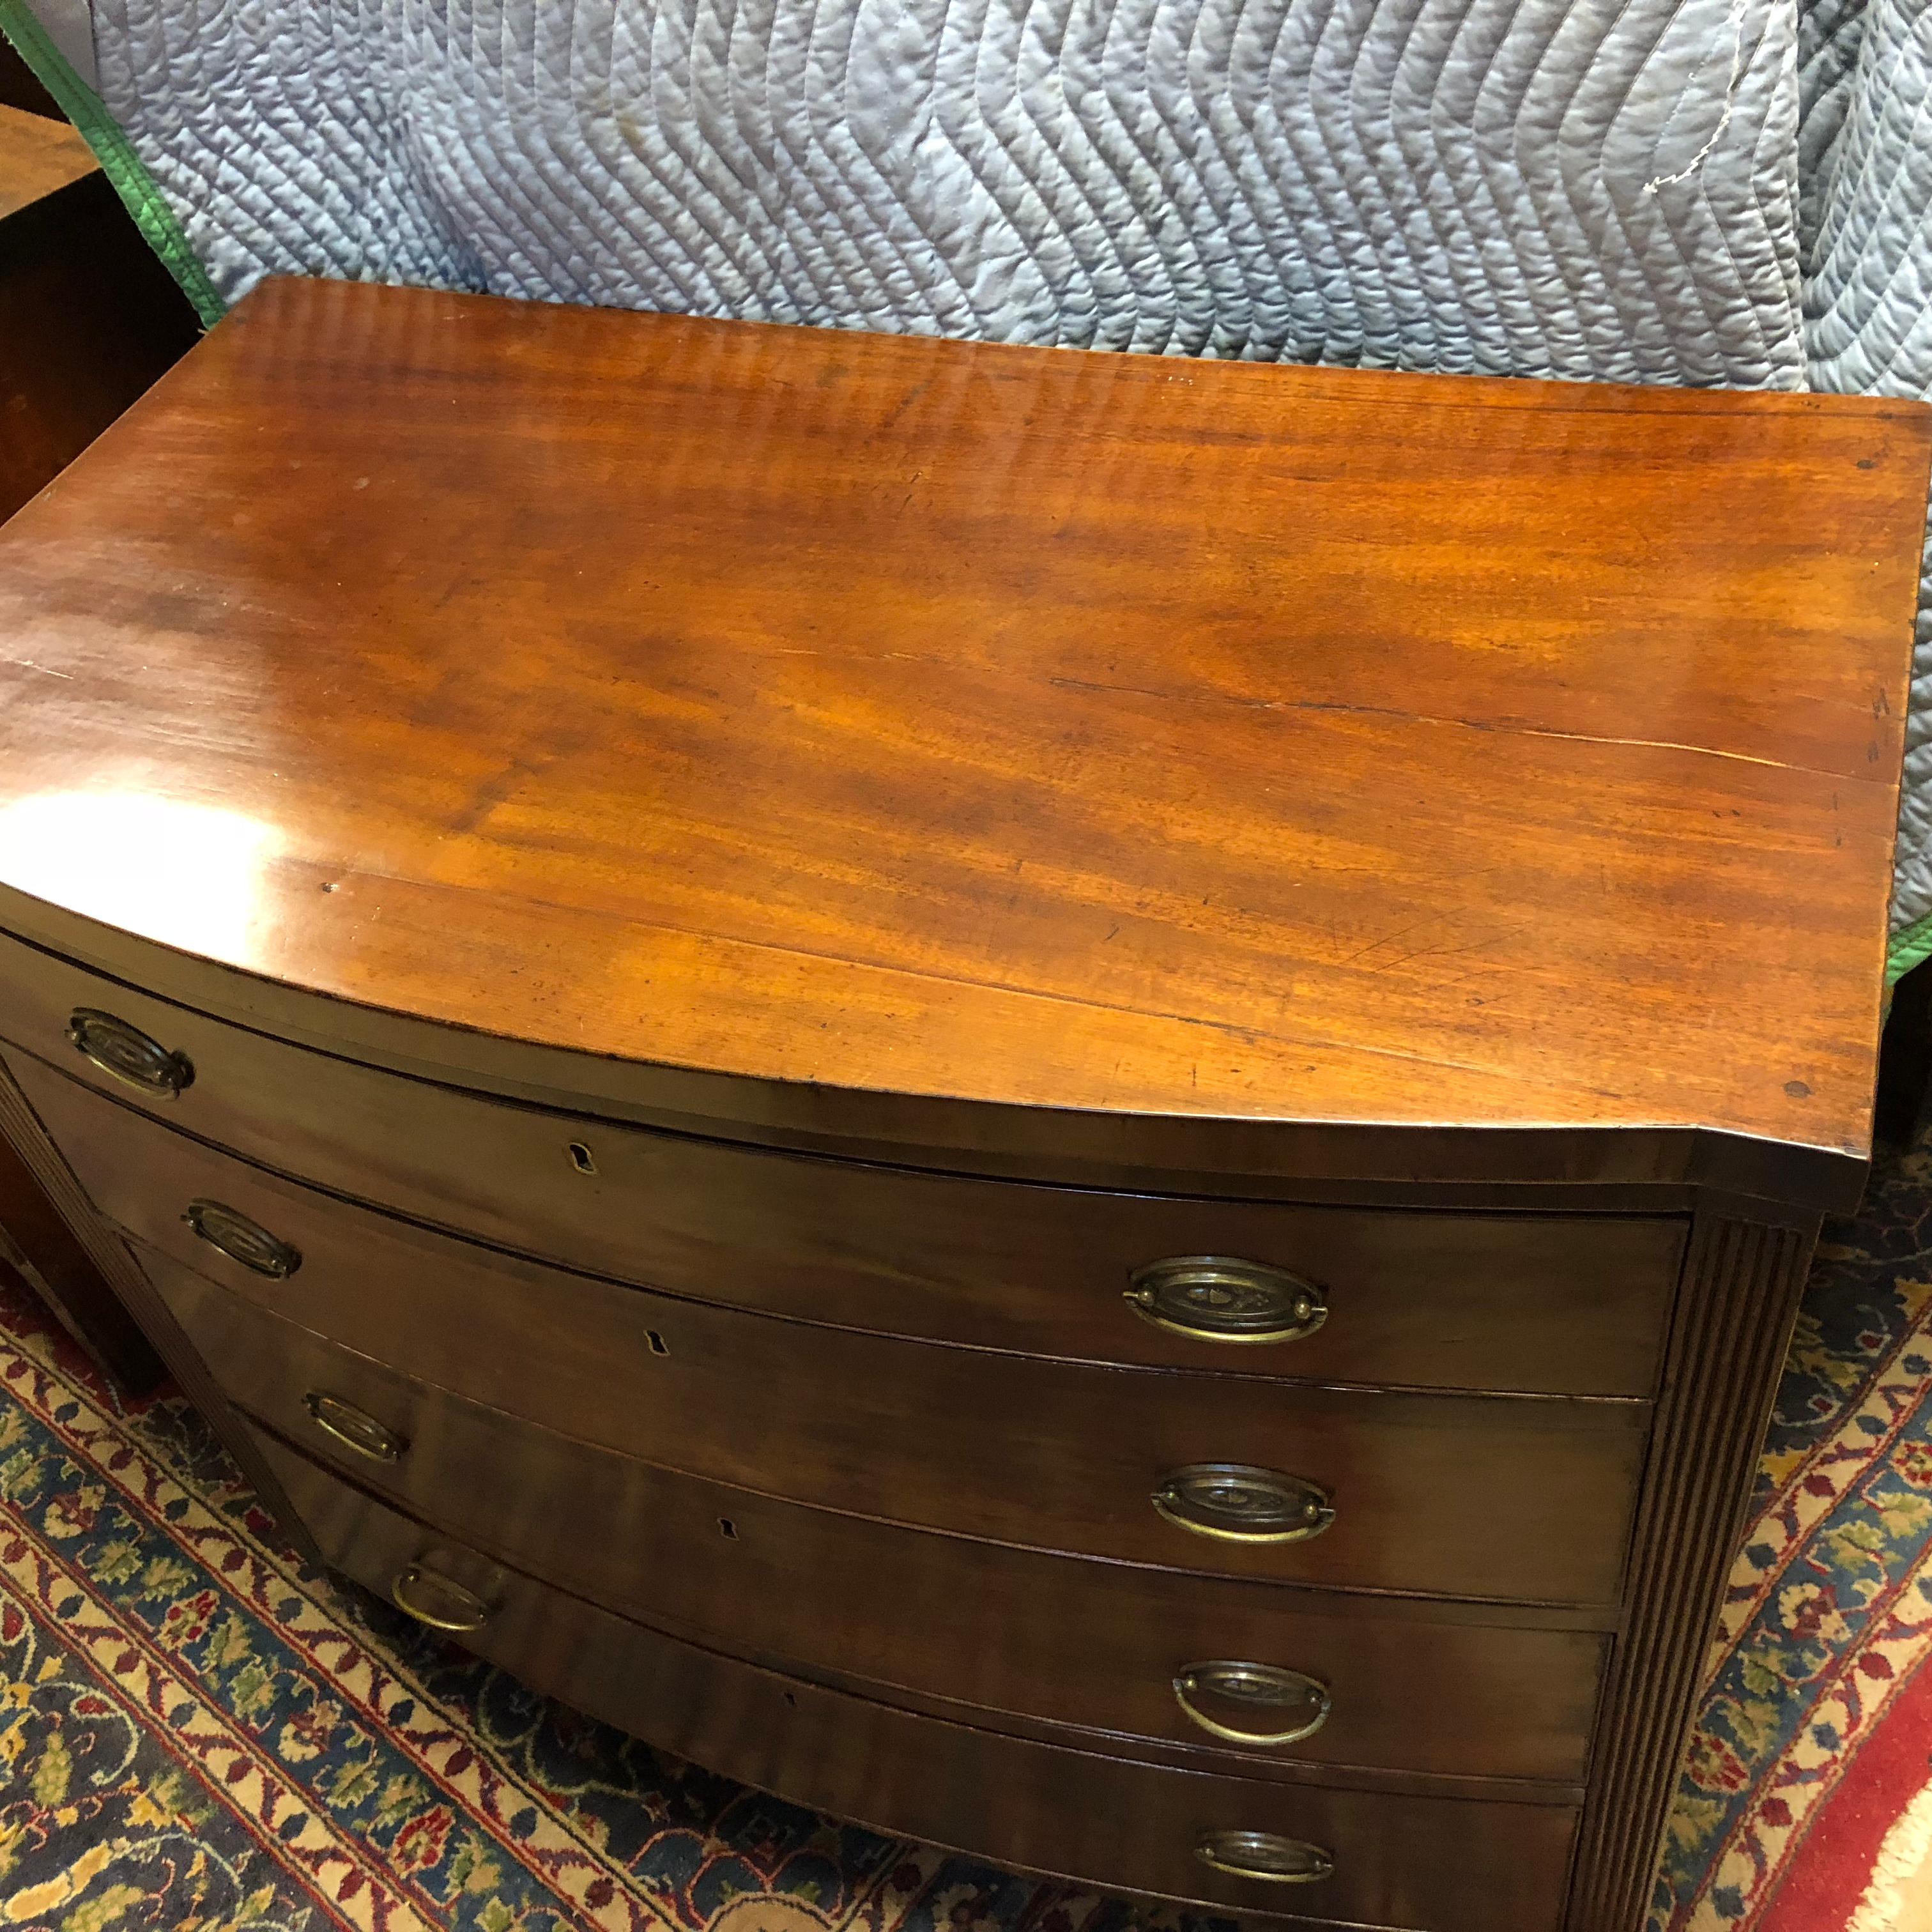 American bow front chest with crotched mahogany drawers, delicate reeding on each side, great finish, period brass pulls and handles, original turned fancy feet, poplar and pine lined. Very traditional and showy.